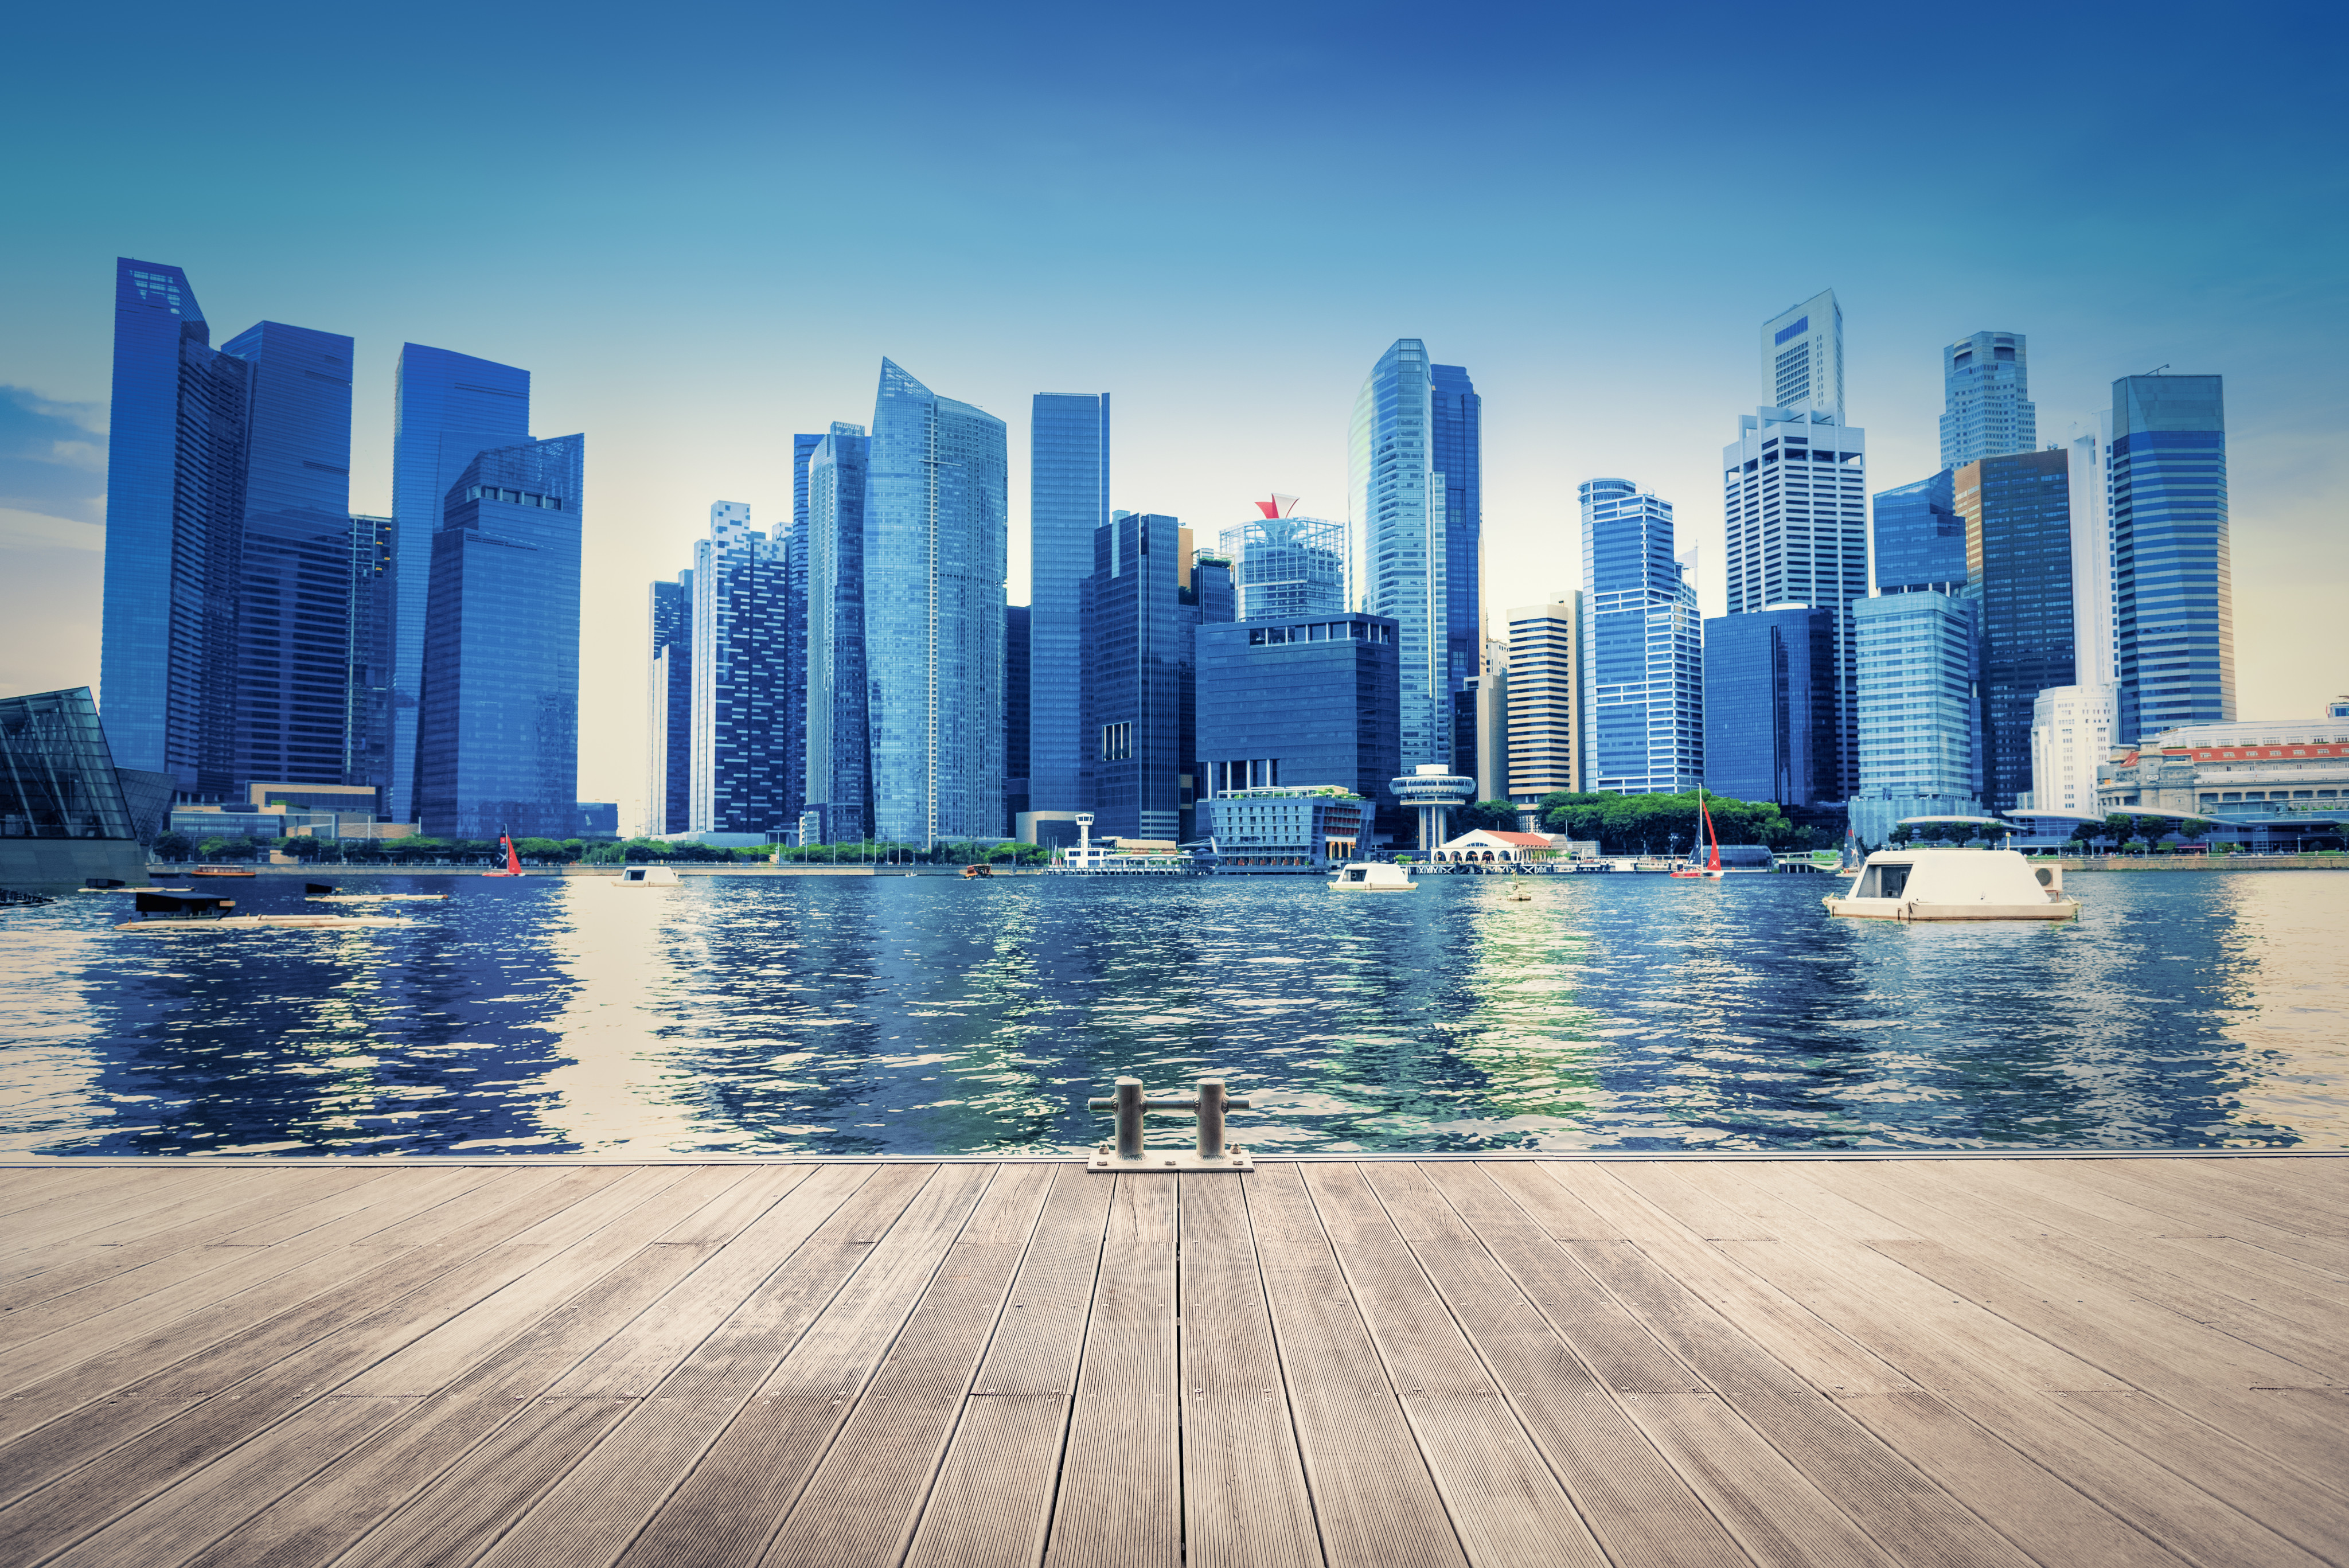 Singapore ranks as one of the world’s top four financial hubs, according to the Global Financial Centres Index produced by the China Development Institute and think tank Z/Yen Partners. Photo: Shutterstock